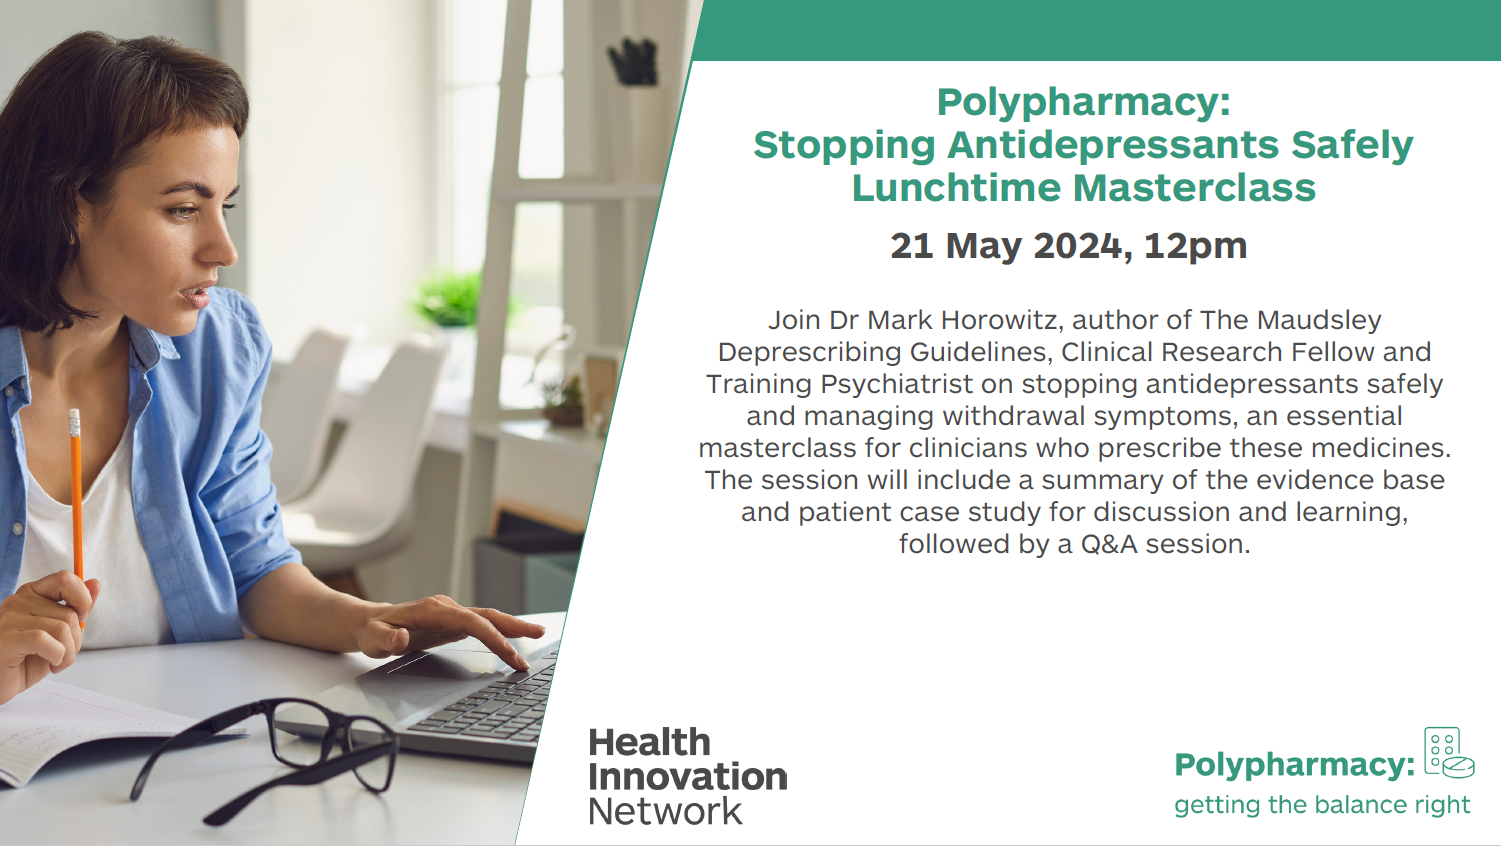 Polypharmacy: Stopping Antidepressants Safely Lunchtime Masterclass